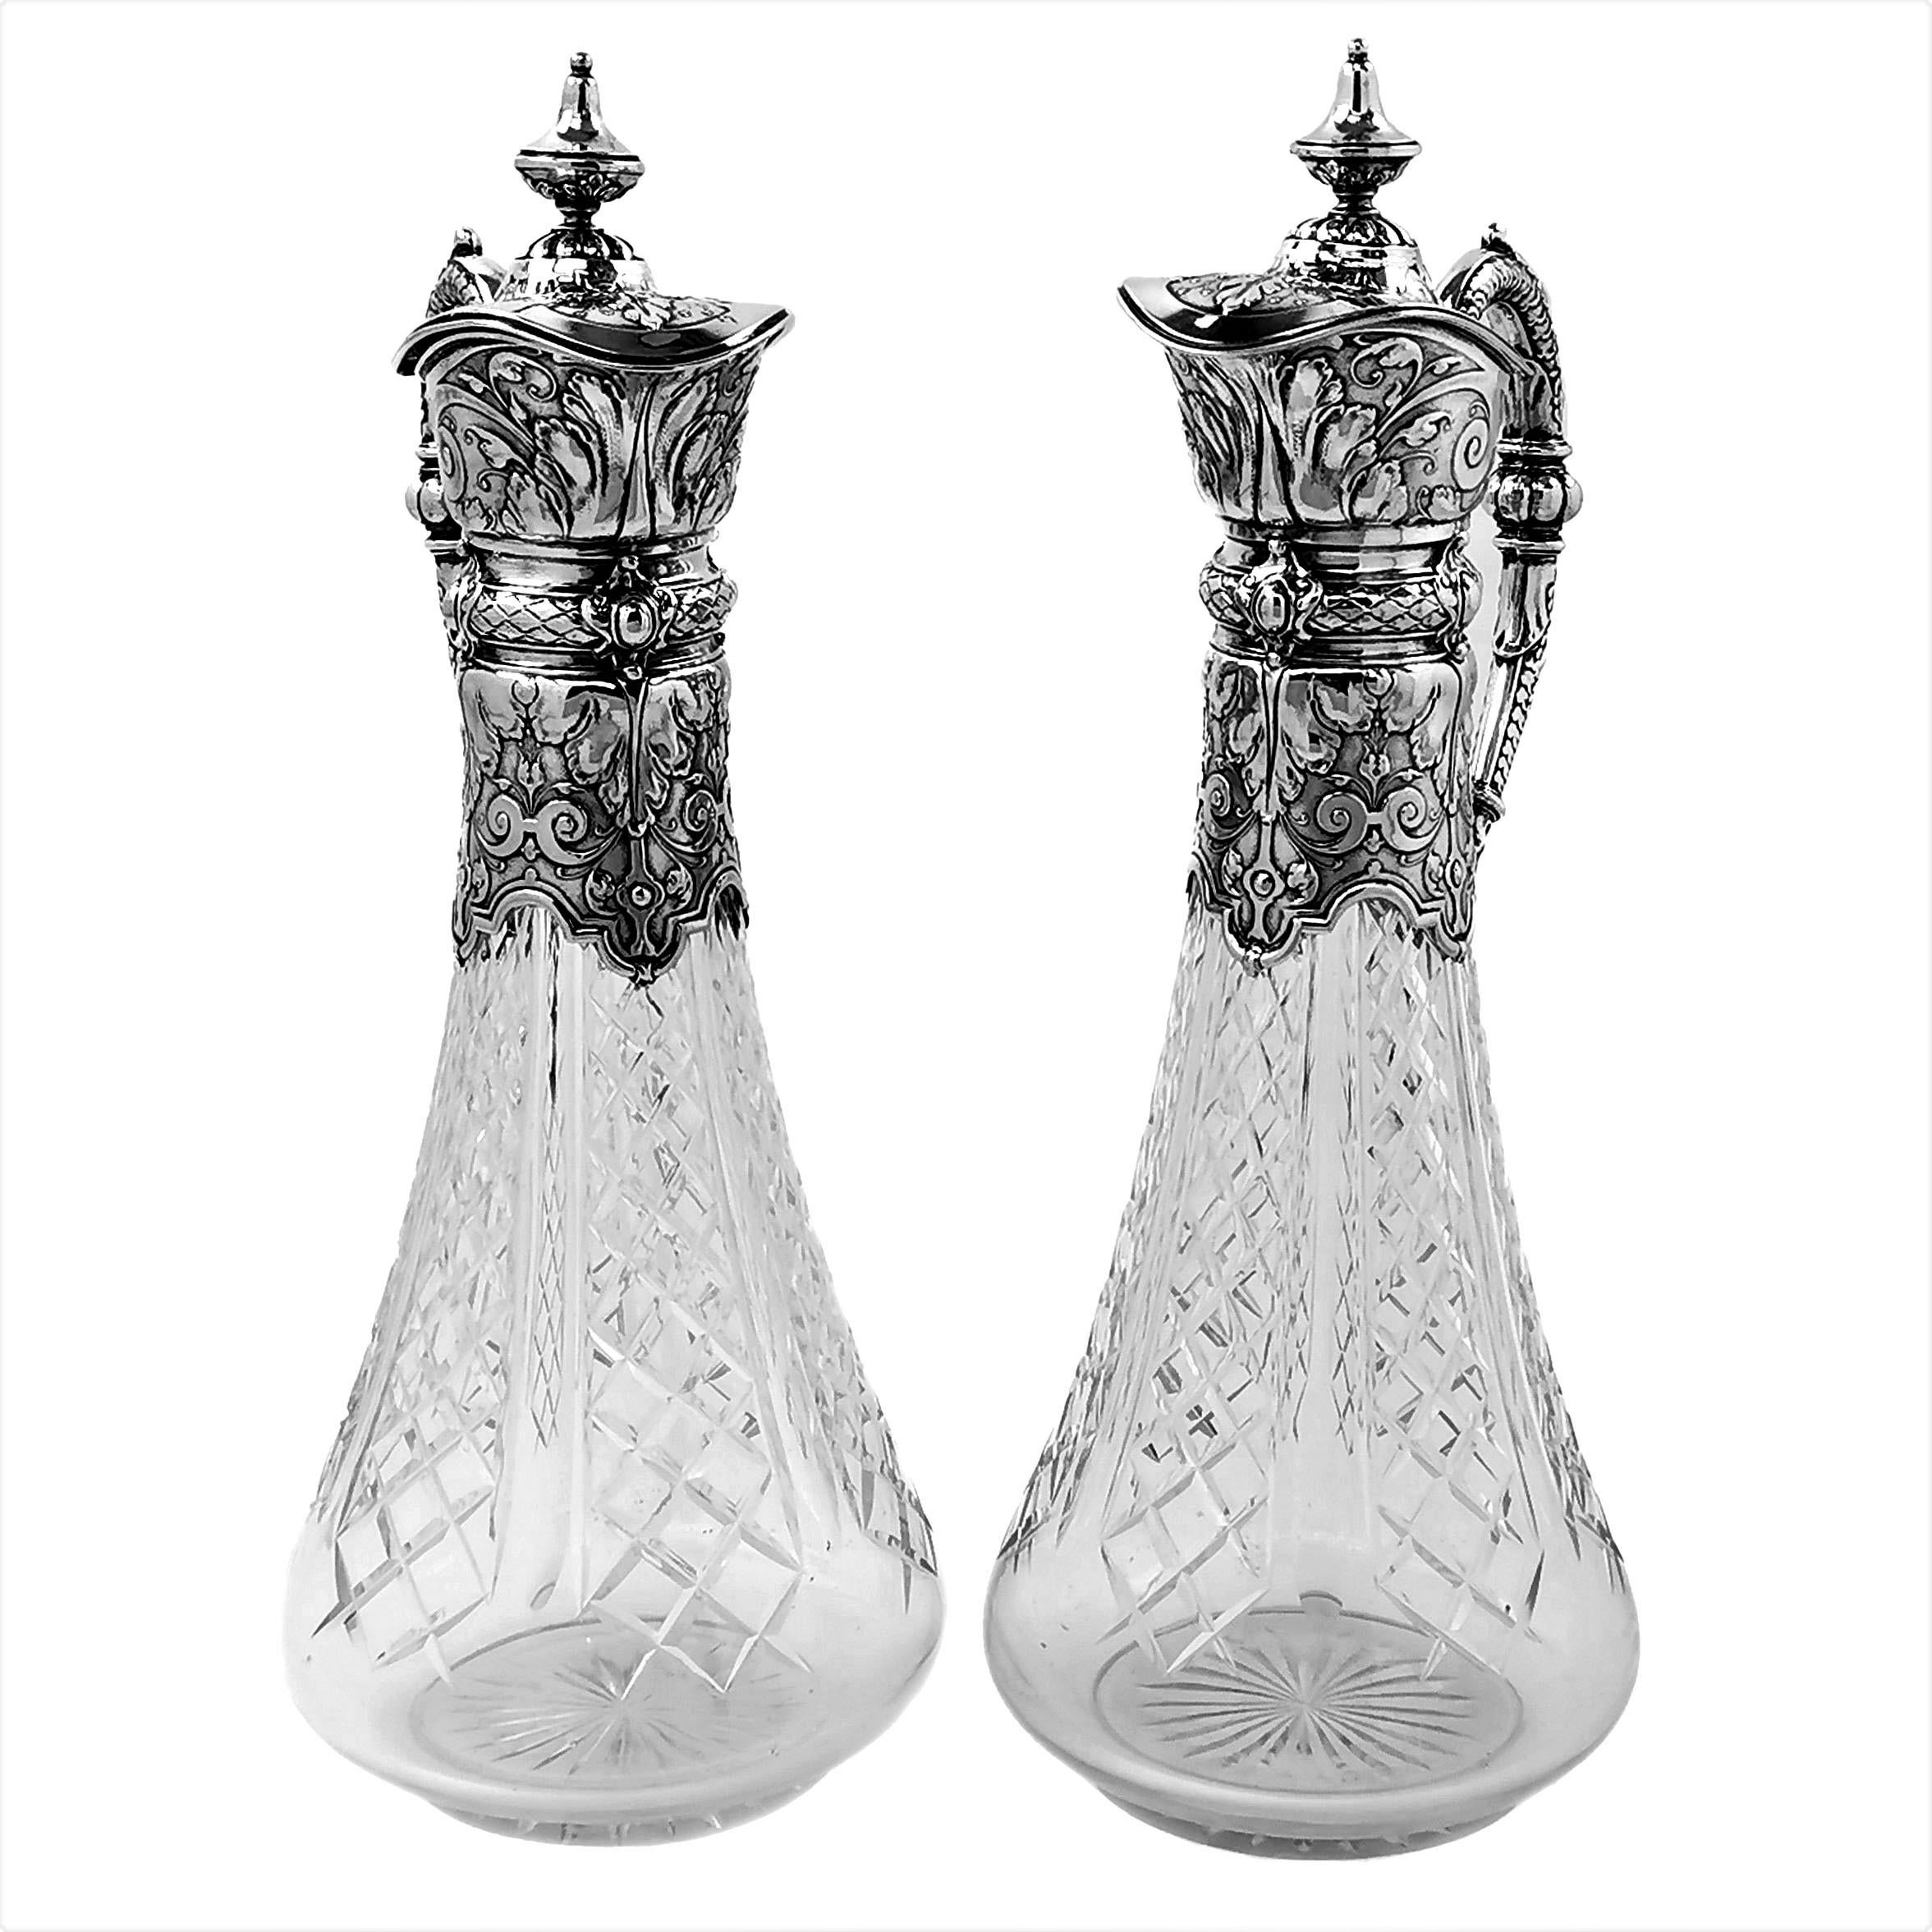 European Pair of Antique German Silver and Cut Glass Claret Jugs Wine Decanters c 1890